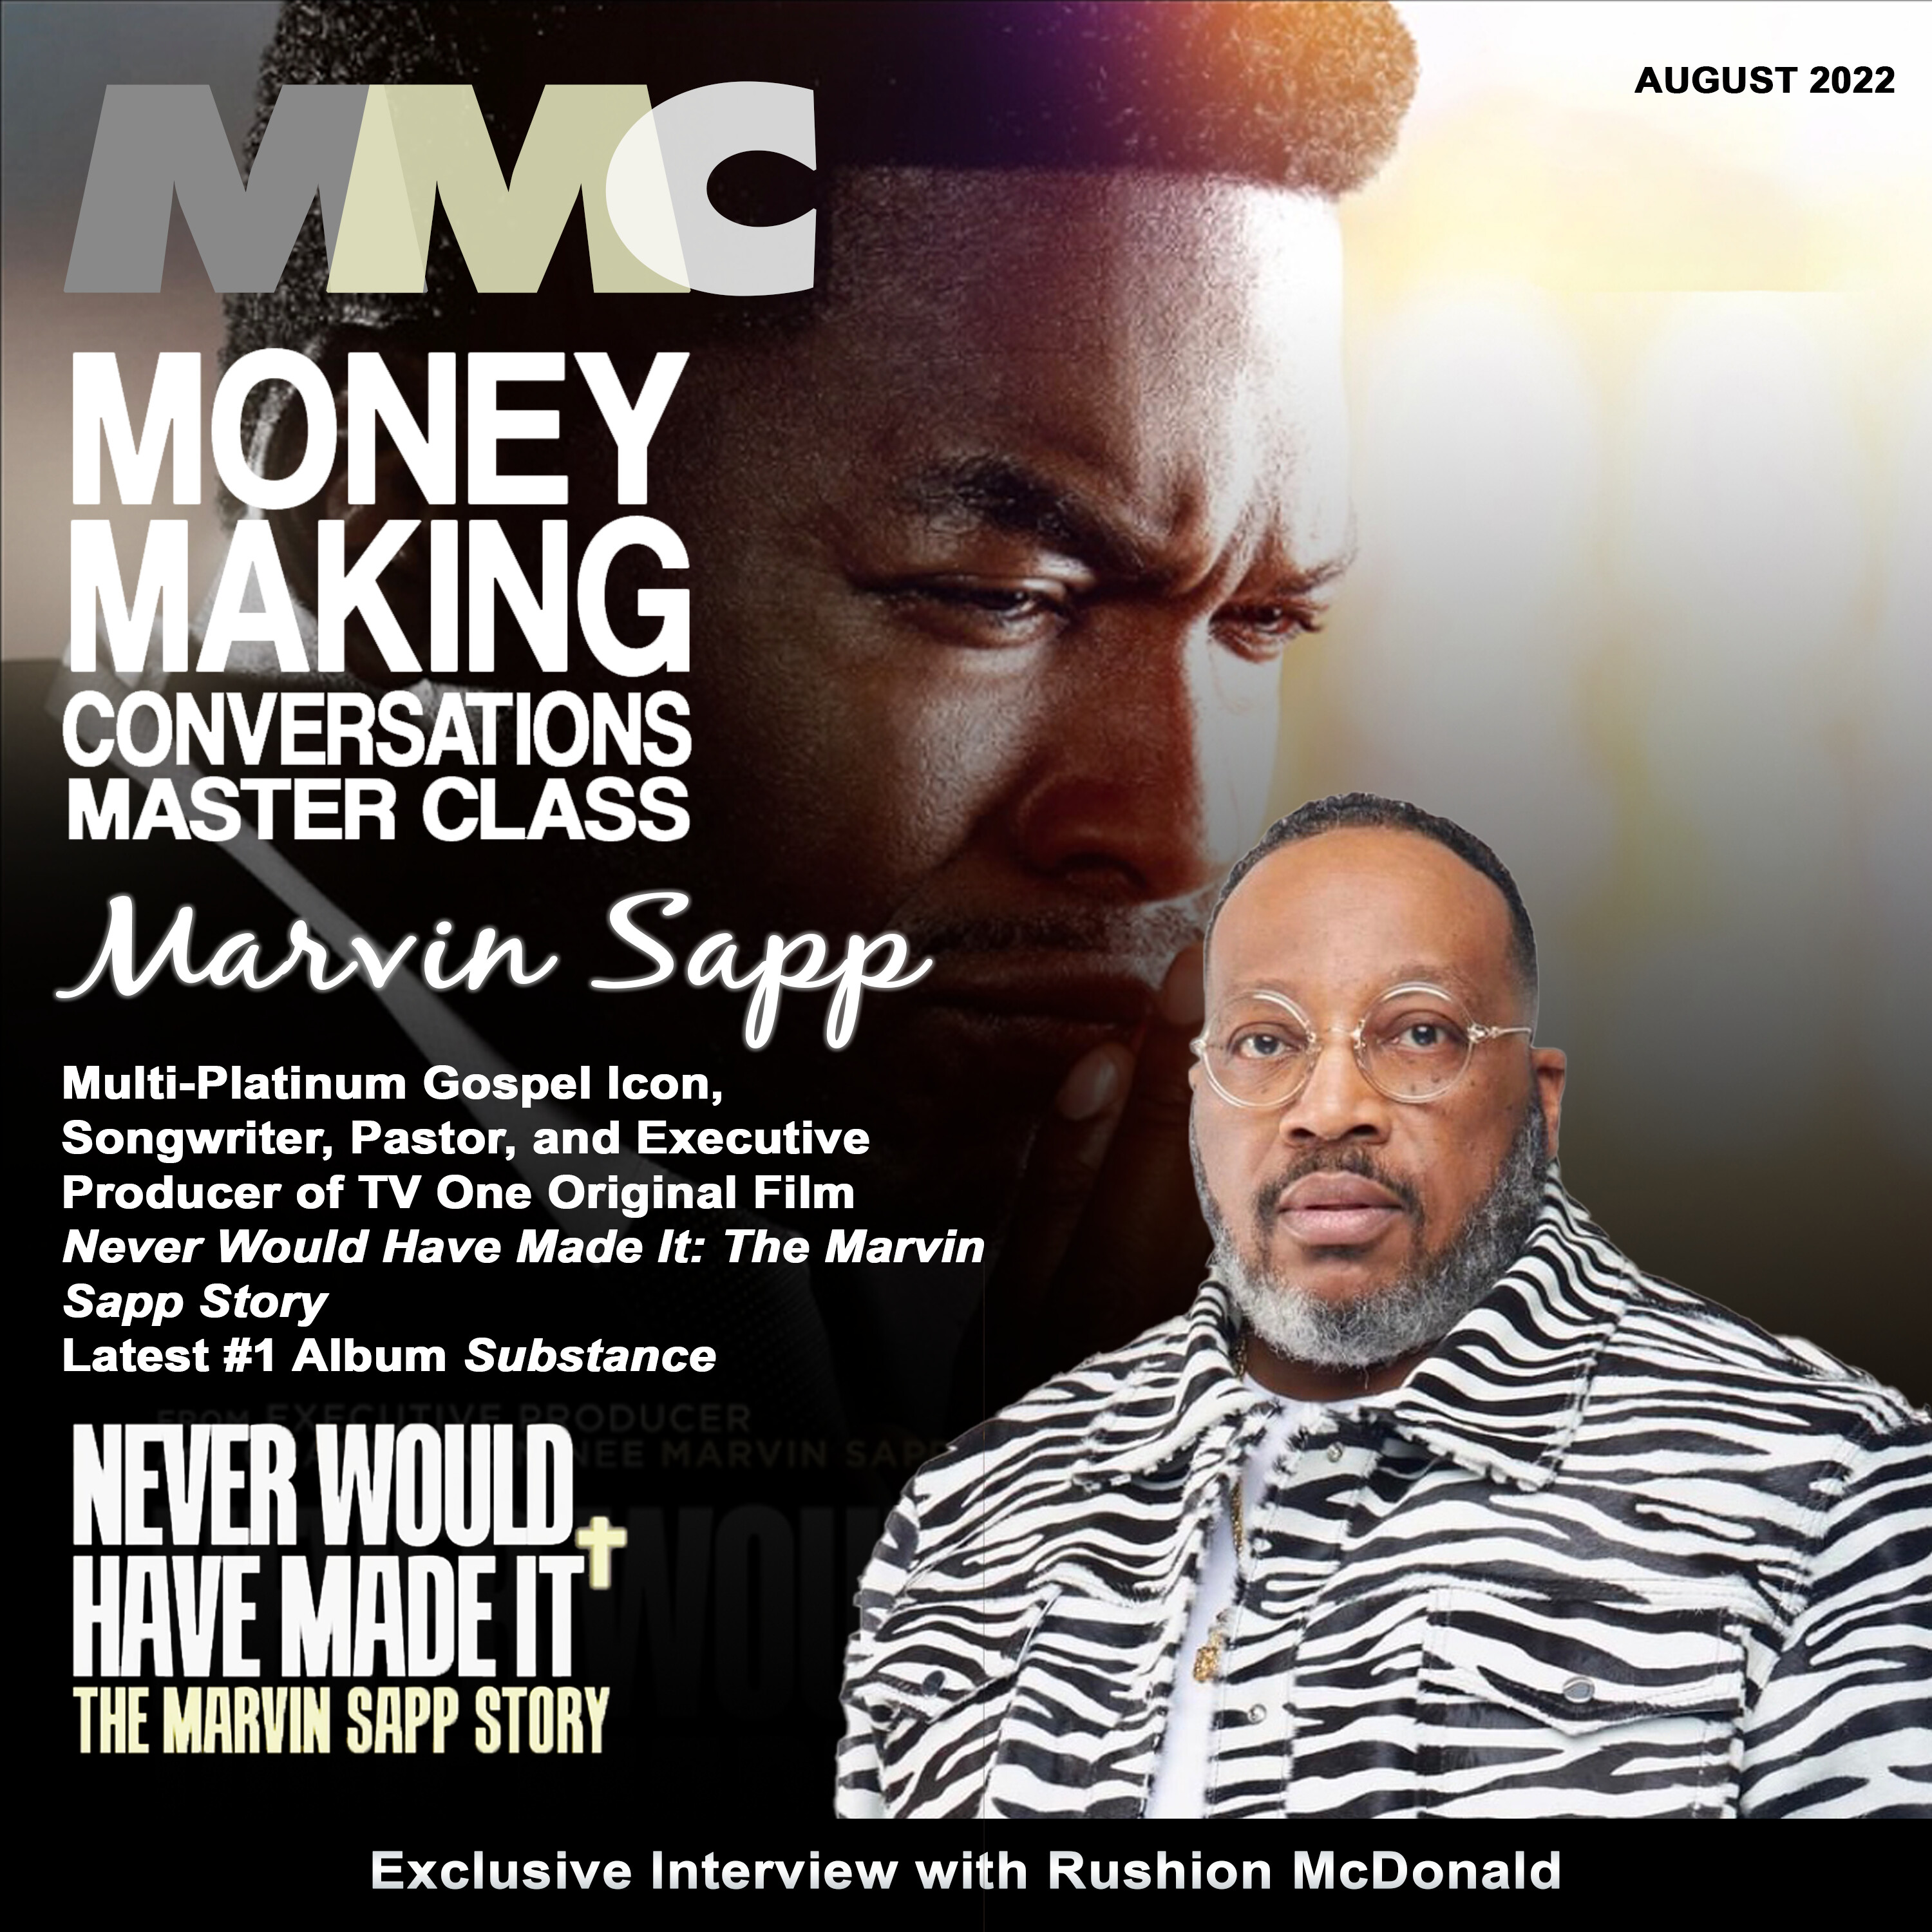 Rushion Interviews Multi-platinum Gospel Icon Bishop Marvin Sapp about his career and 